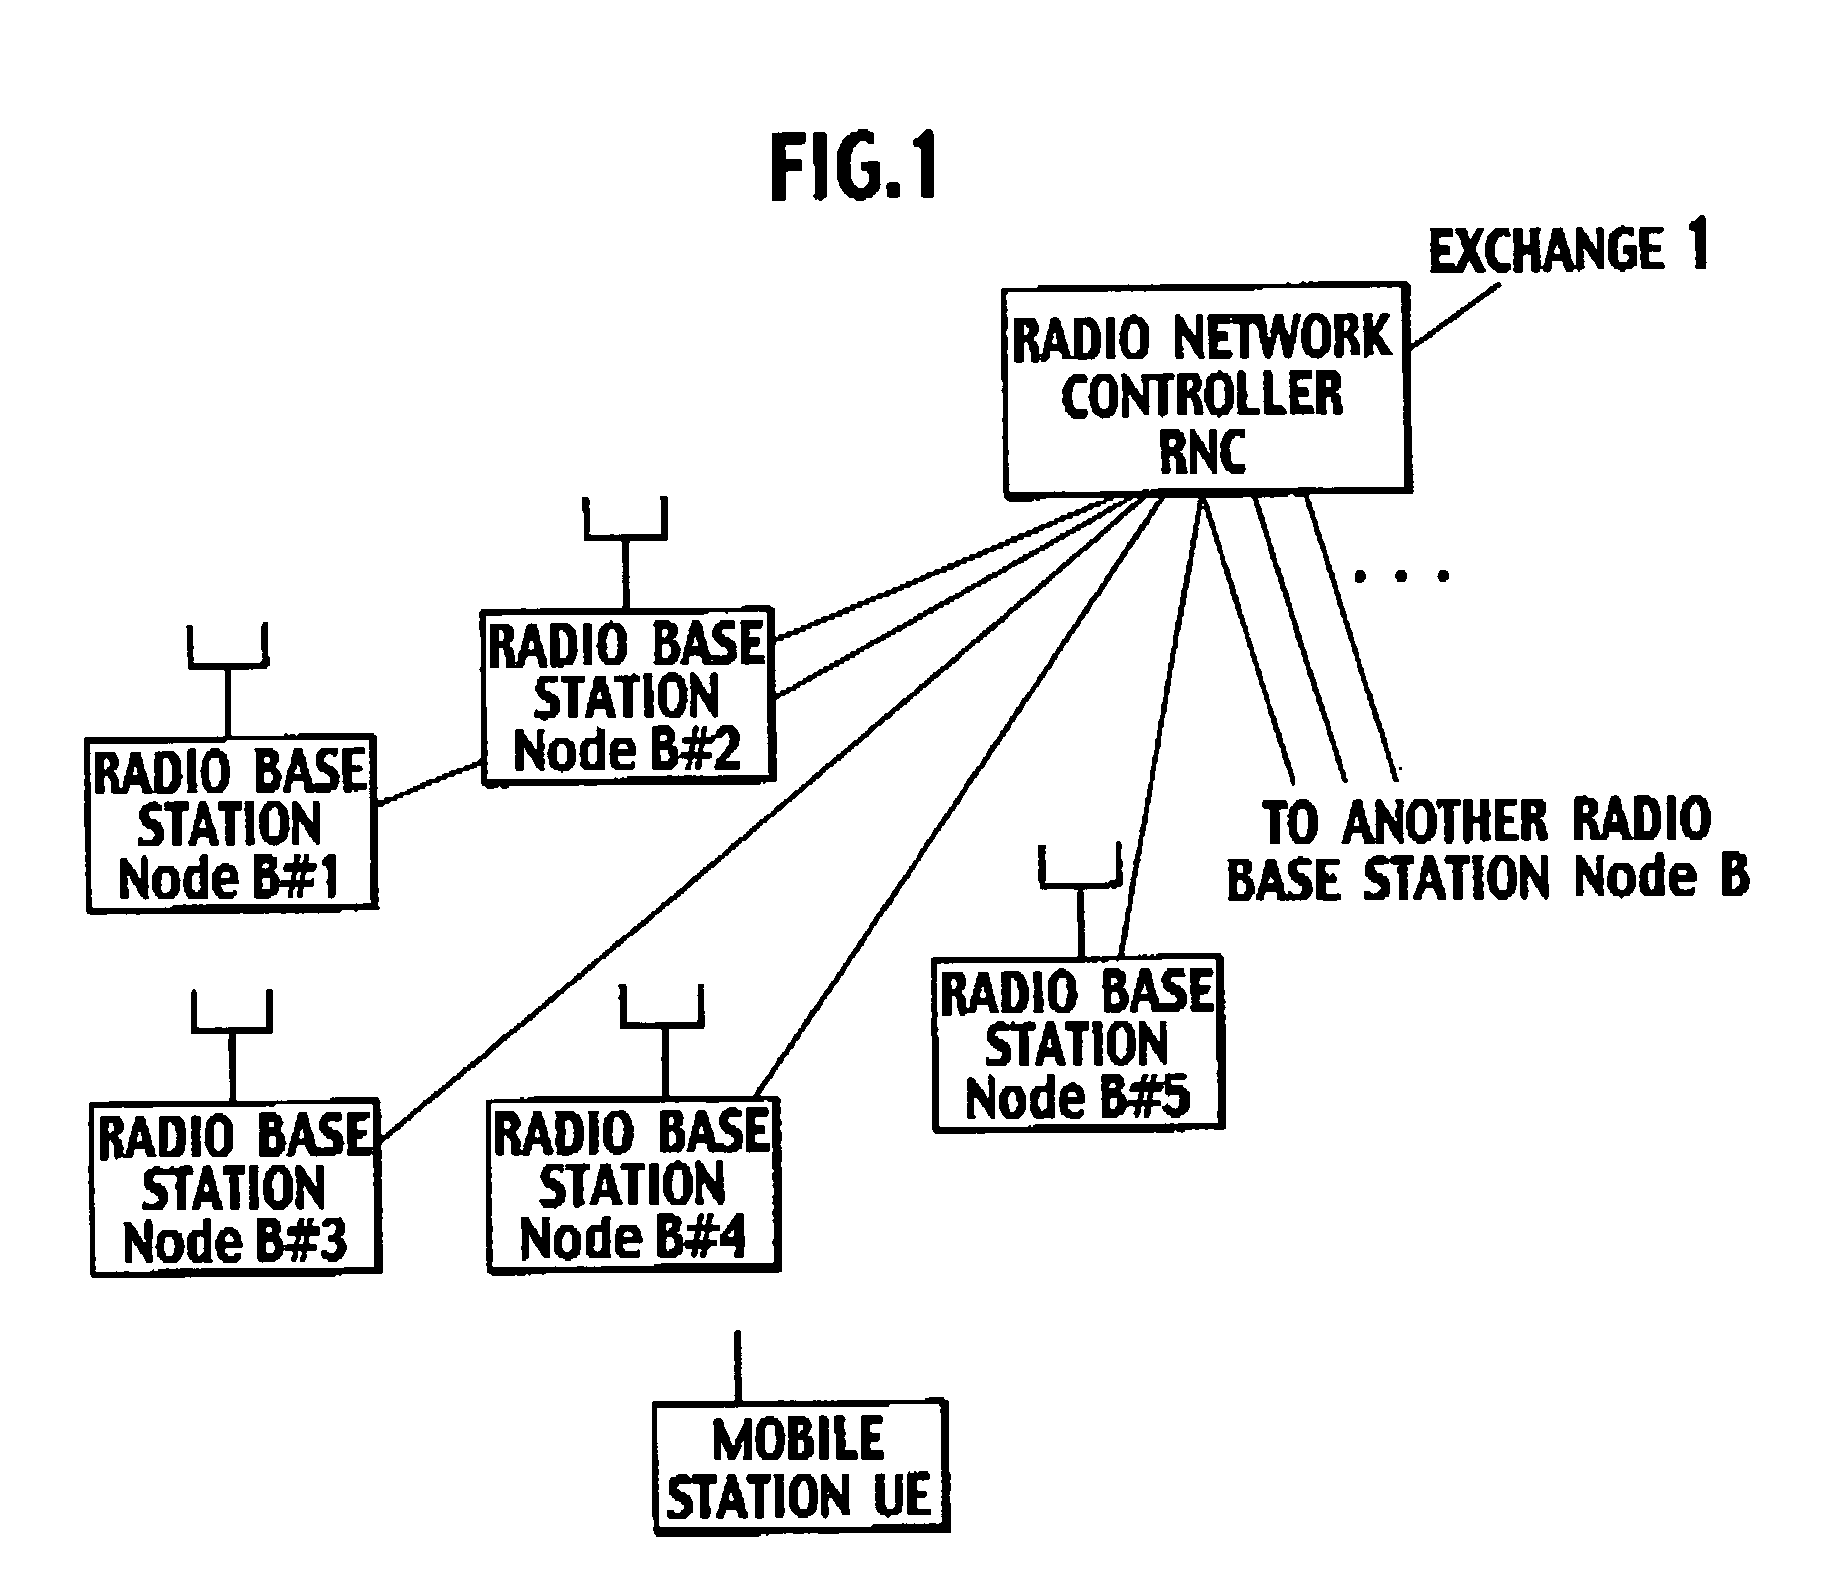 Transmission rate control method and mobile station